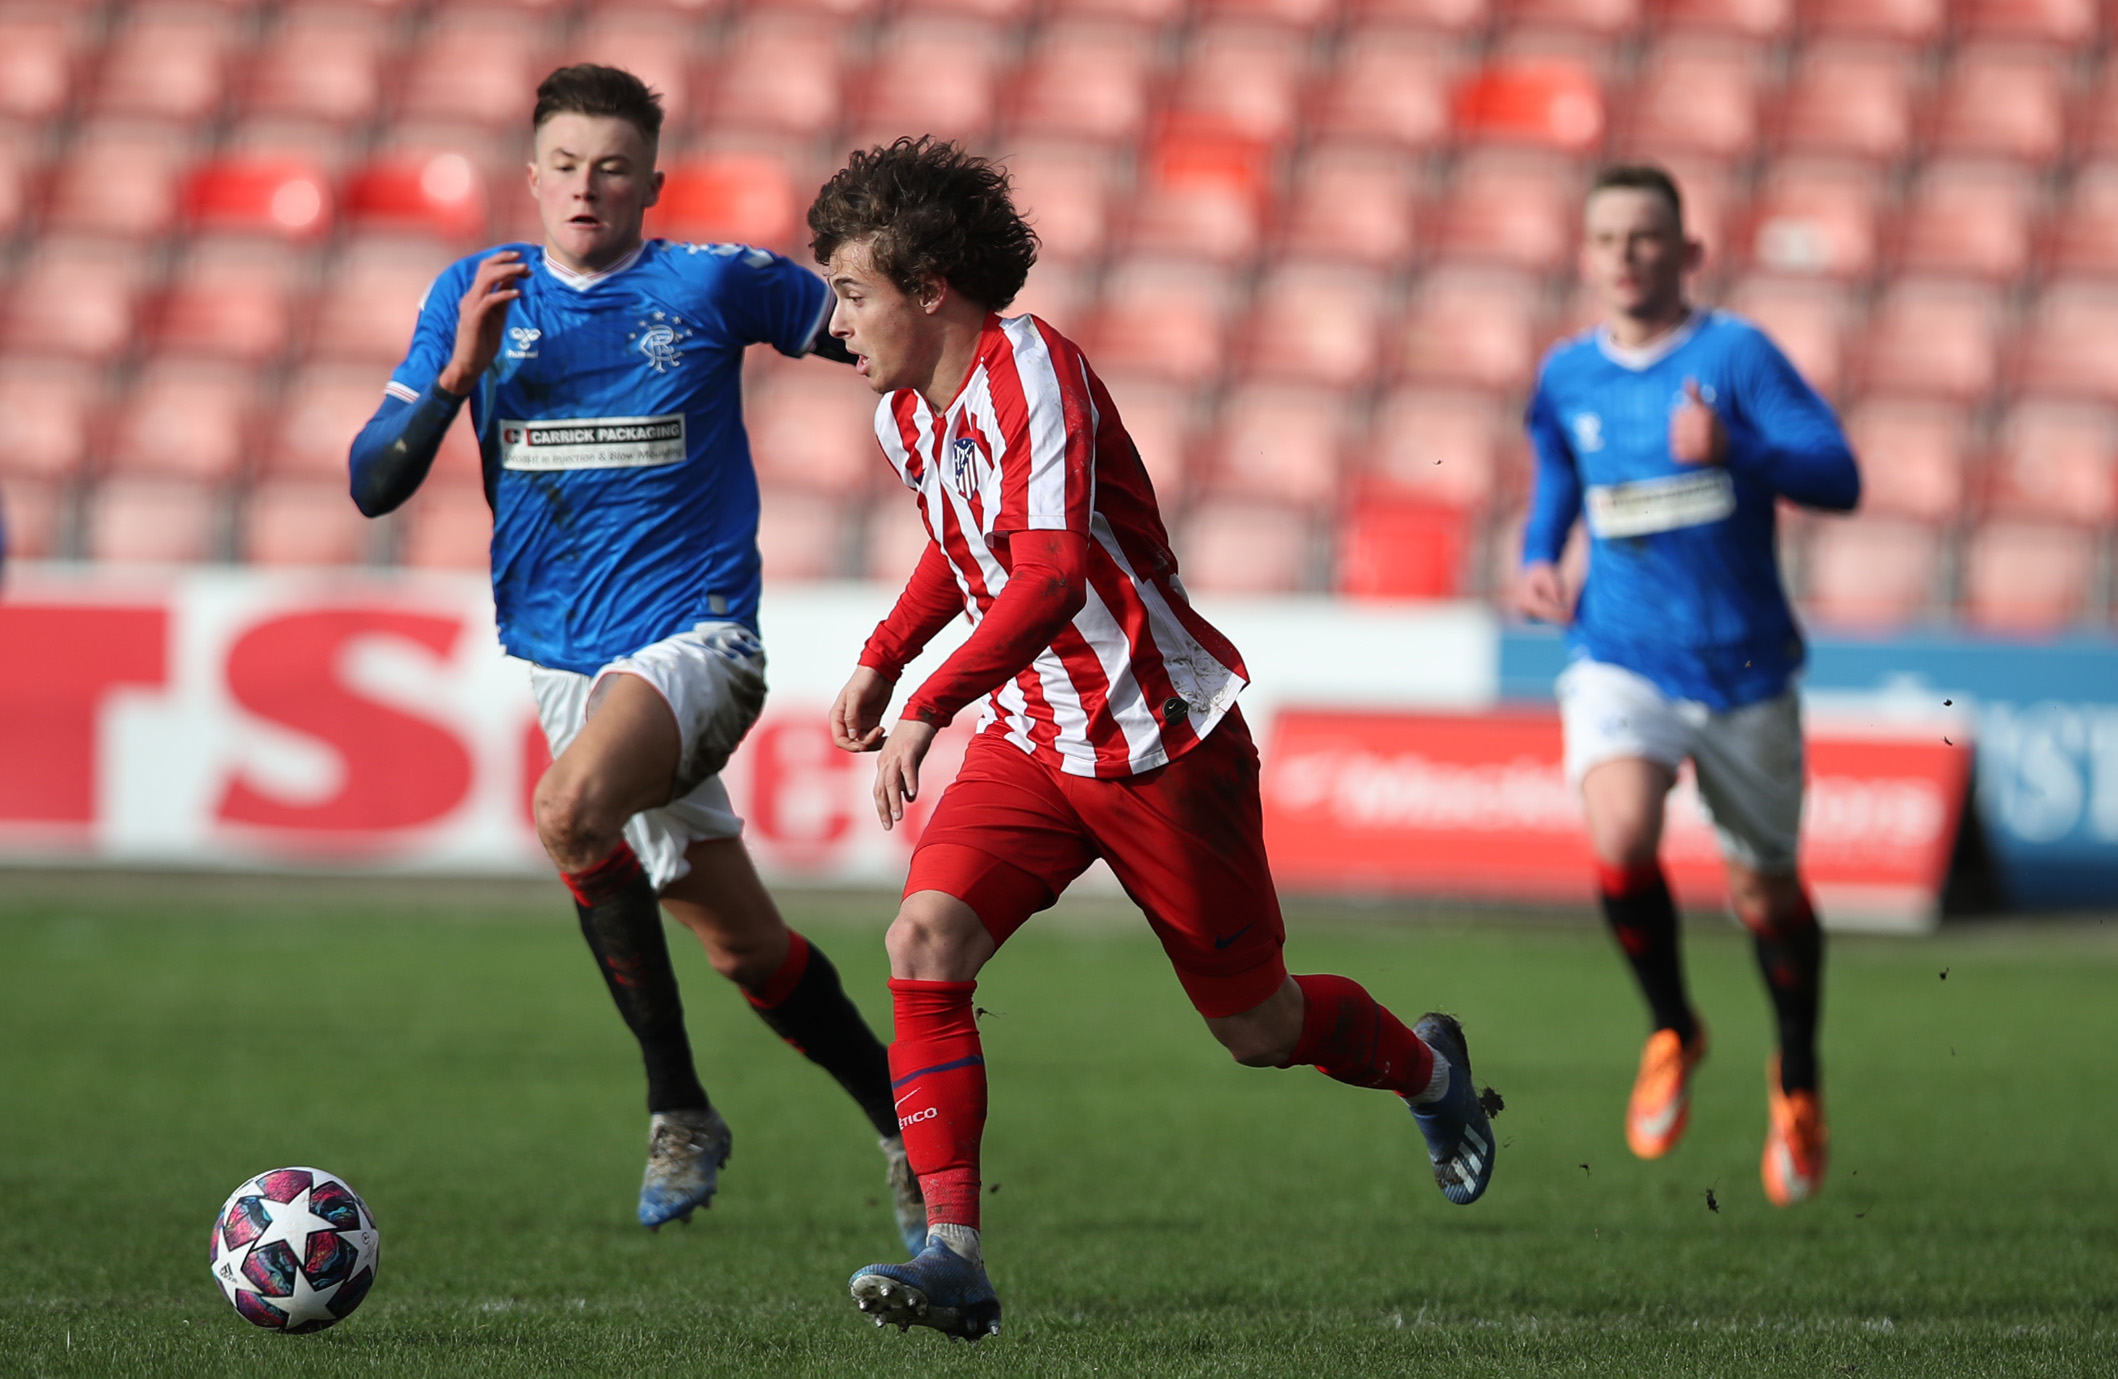 Rodrigo Riquelme (C) of Atletico Madrid in action against Rangers U19 in the UEFA Youth League (Getty Images)